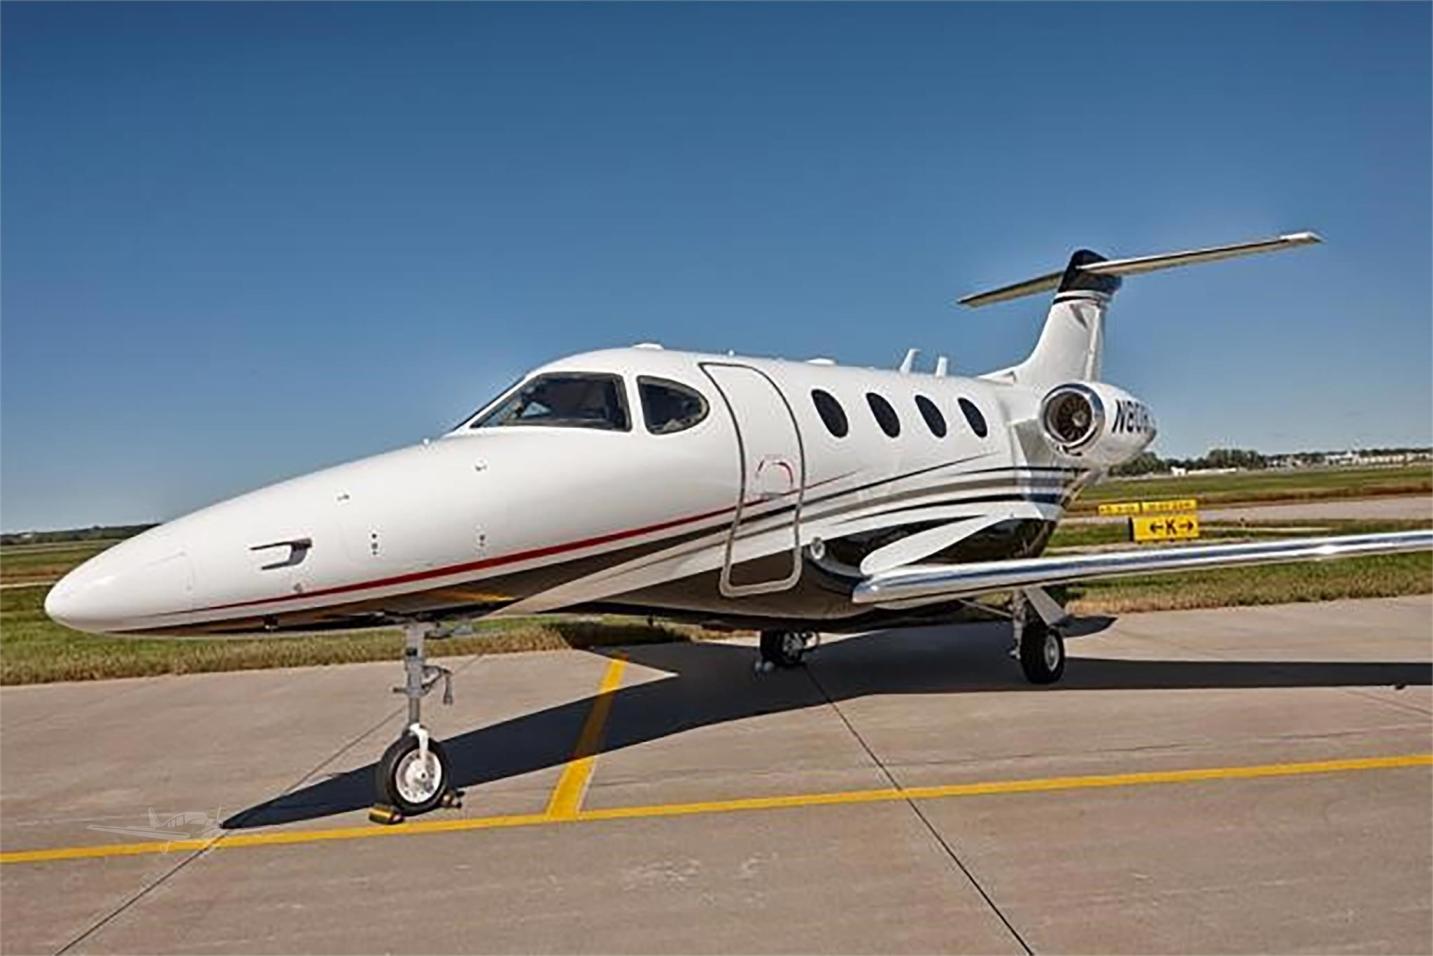 Where Can I Find Beechcraft Aircraft for Sale?